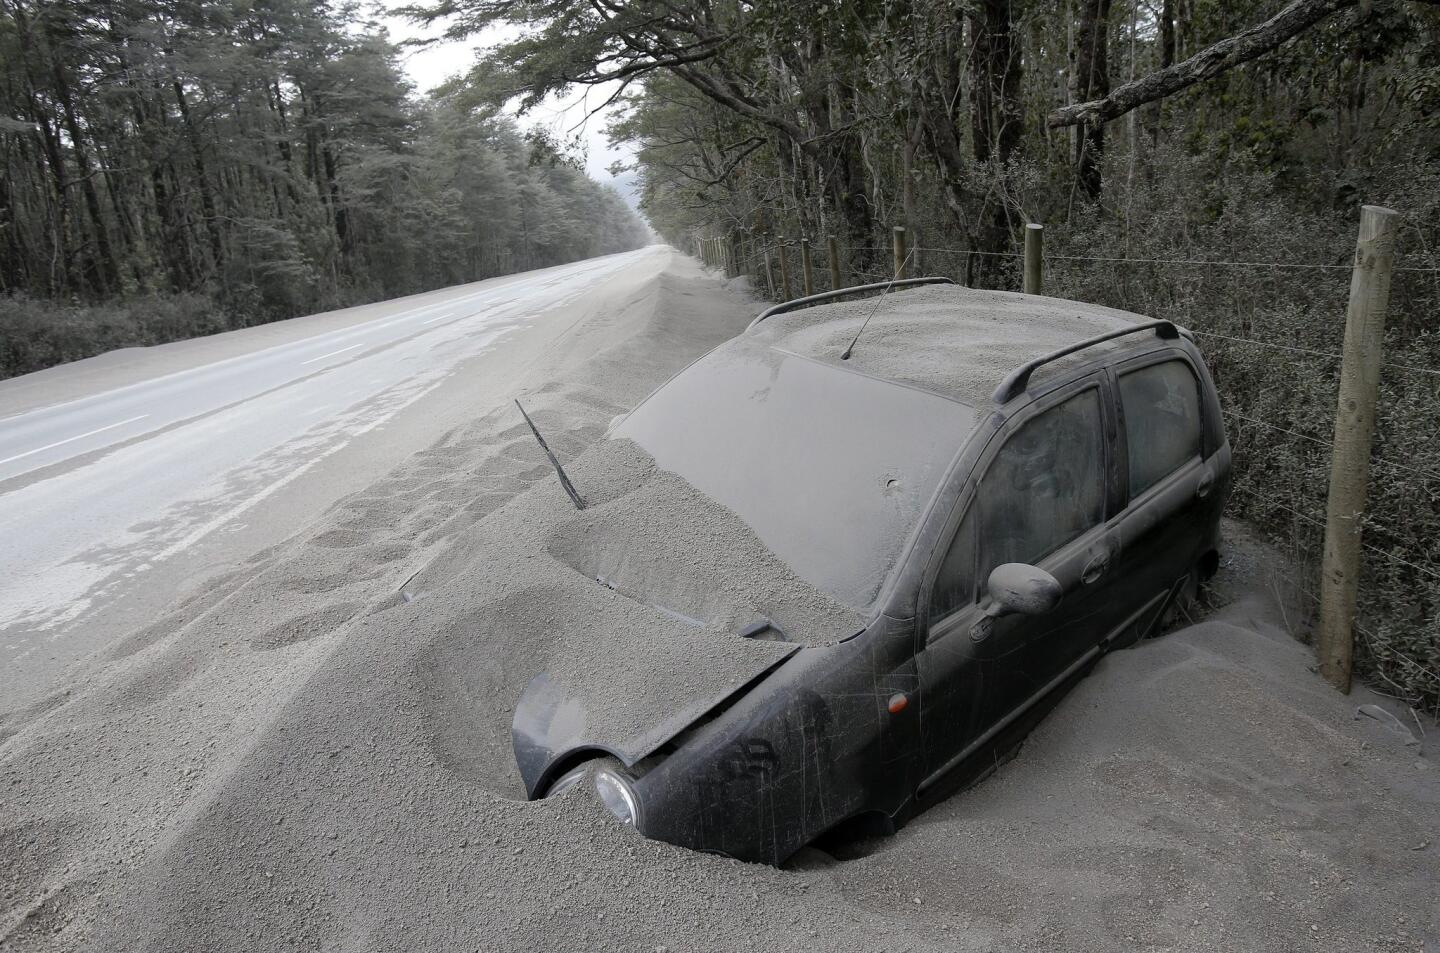 A vehicle near Ensenada in southern Chile is covered with ashes after the eruption of the Calbuco volcano.